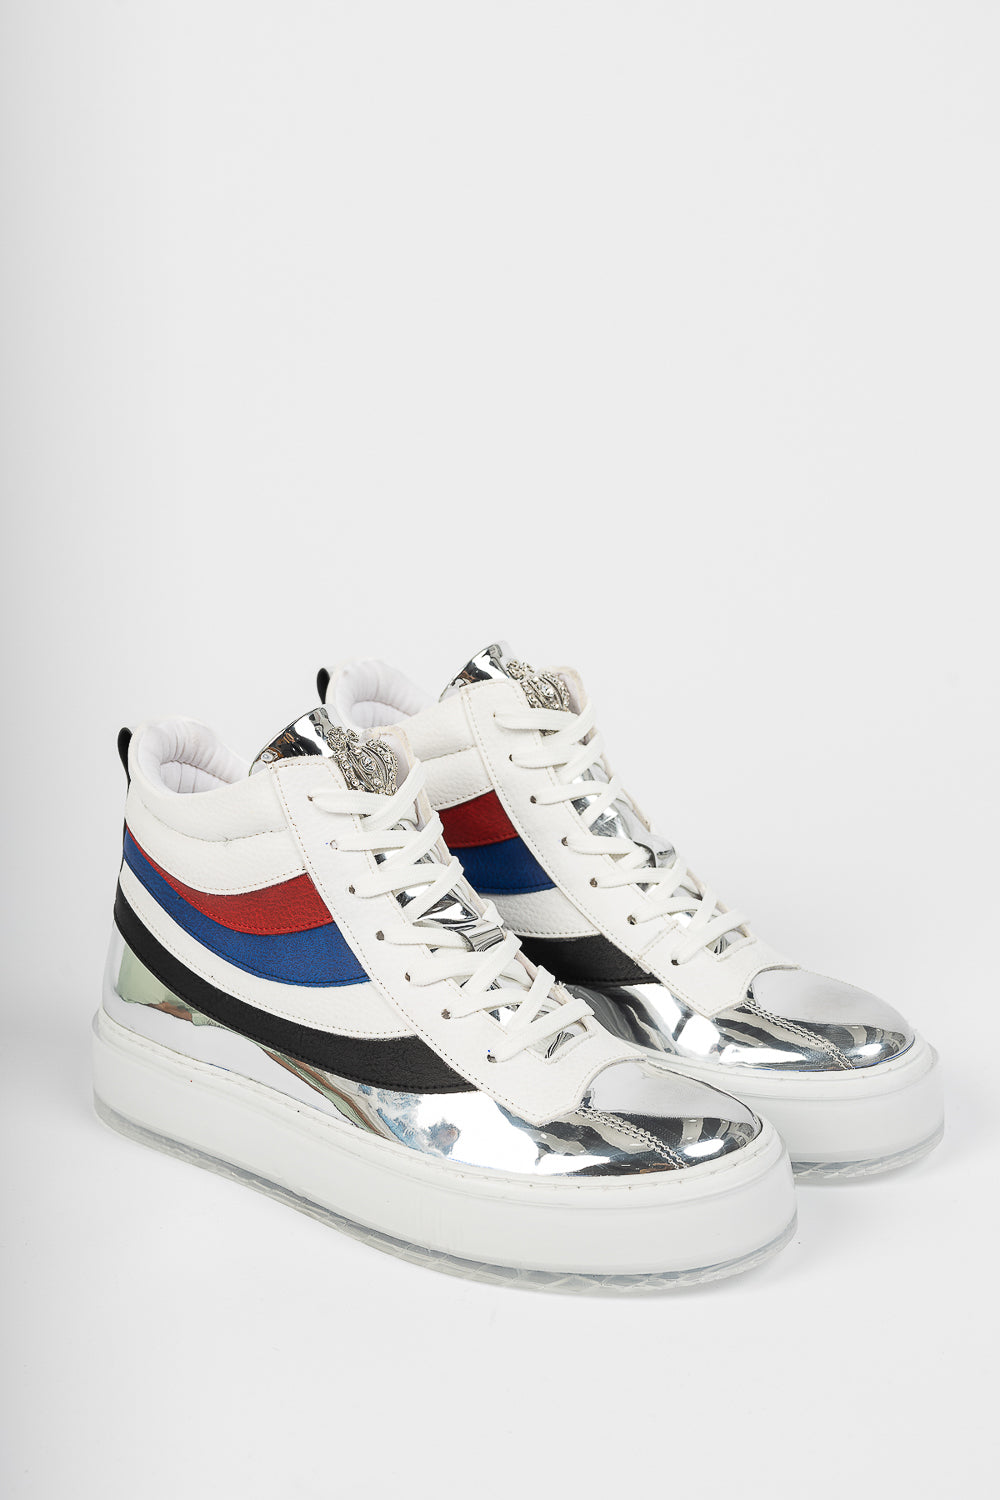 Majesty Silver White - Swagg Splash Sneakers